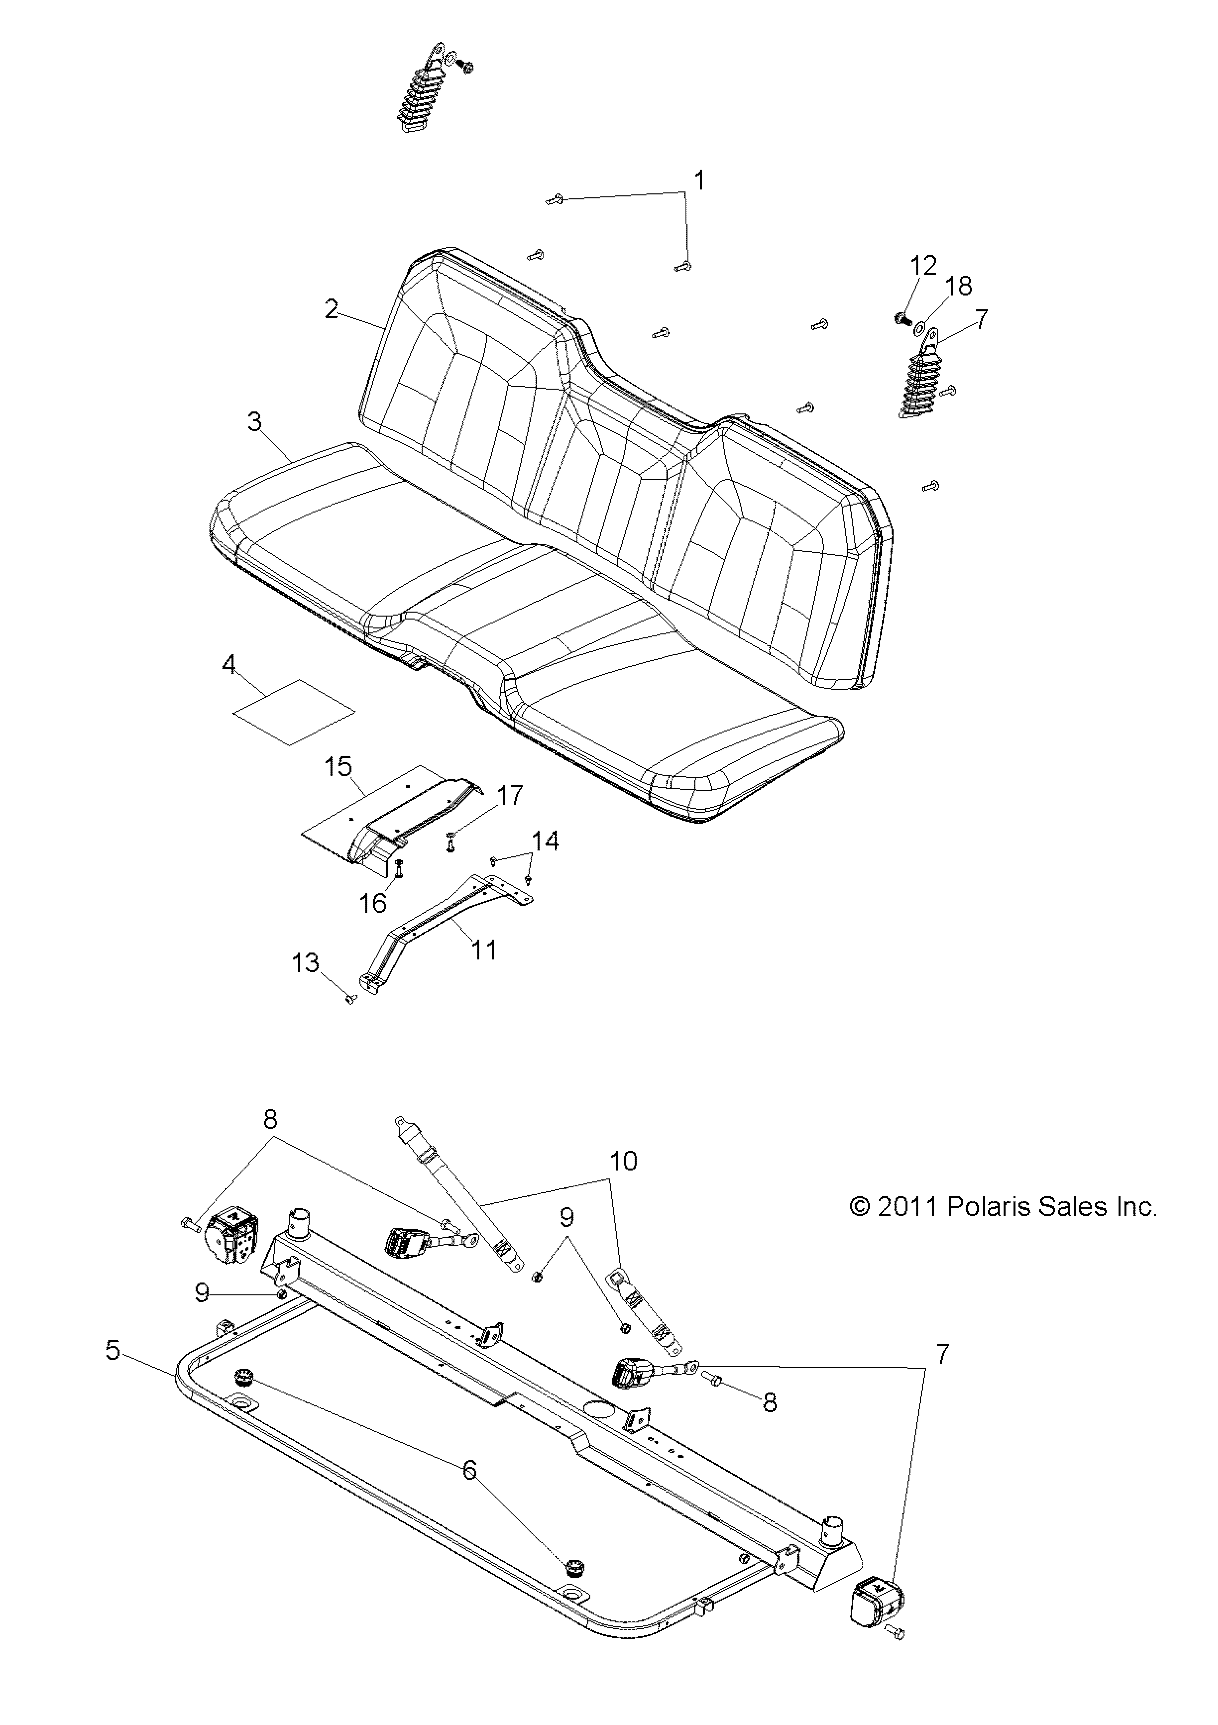 Part Number : 5813738 SEAT BASE SHIELD